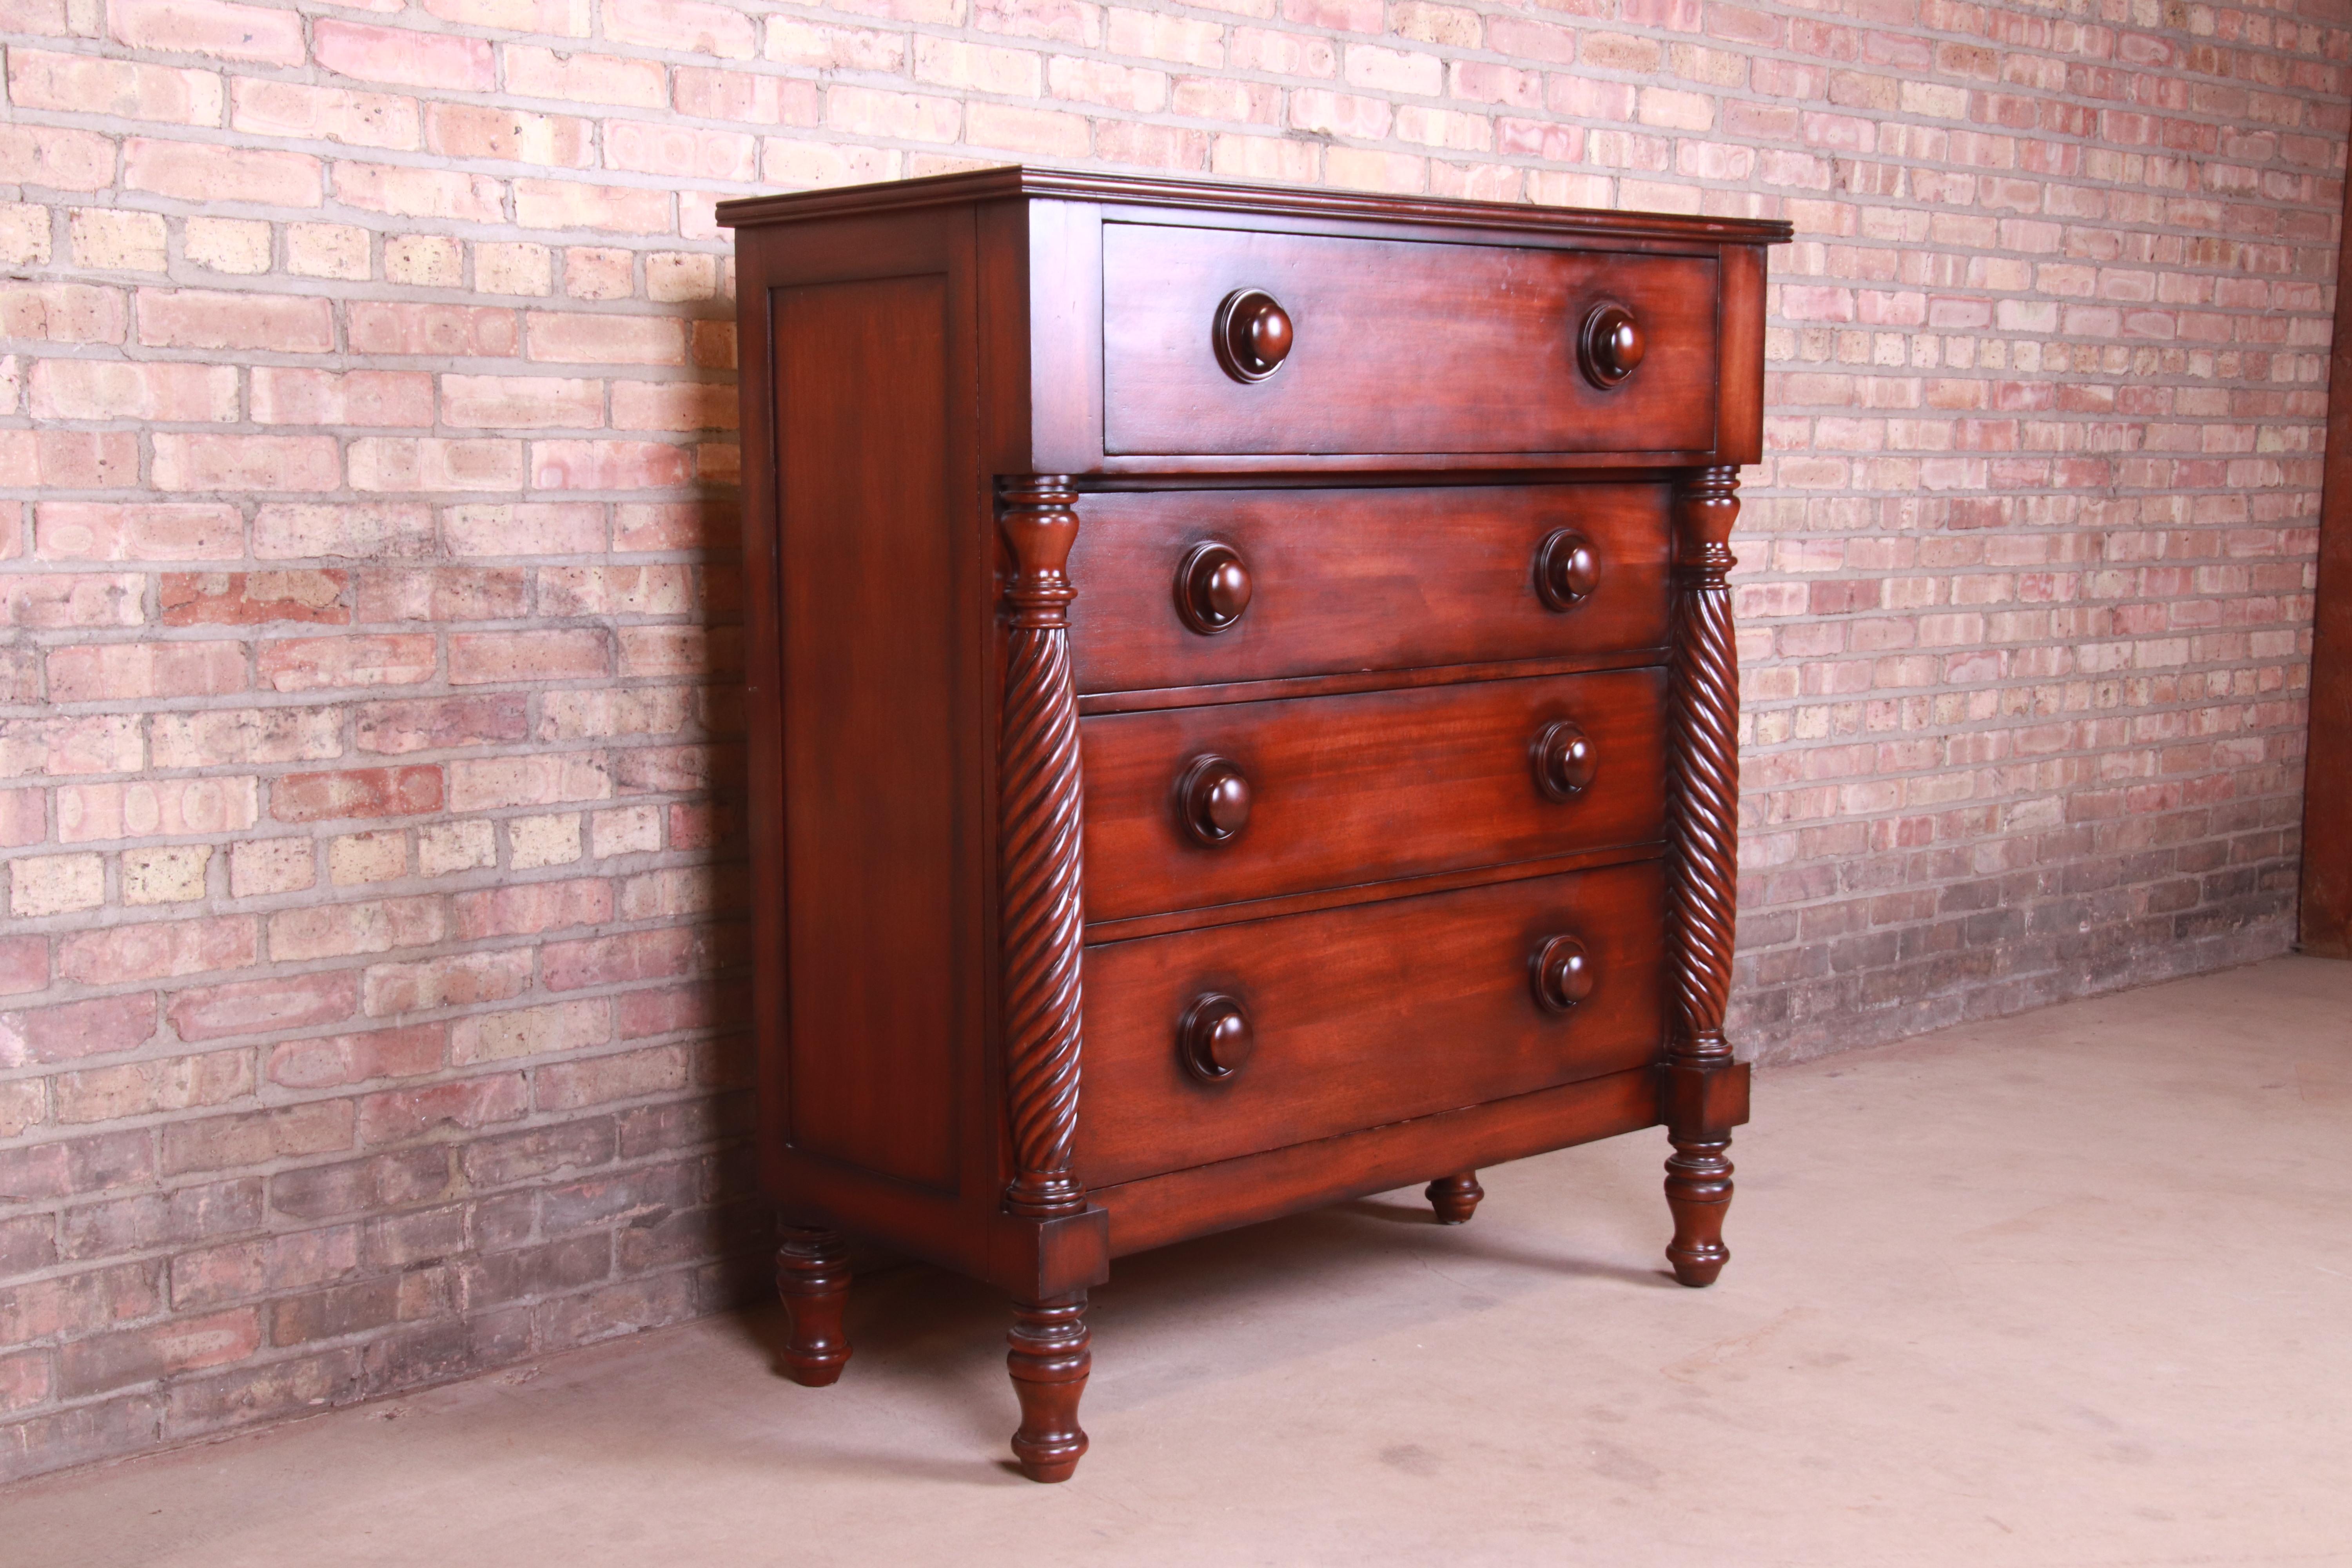 A gorgeous American Empire style four-drawer highboy dresser chest

By Ralph Lauren for Henredon

Colombia, circa 1990s

Mahogany, with carved columns and turned legs.

Measures: 45.88